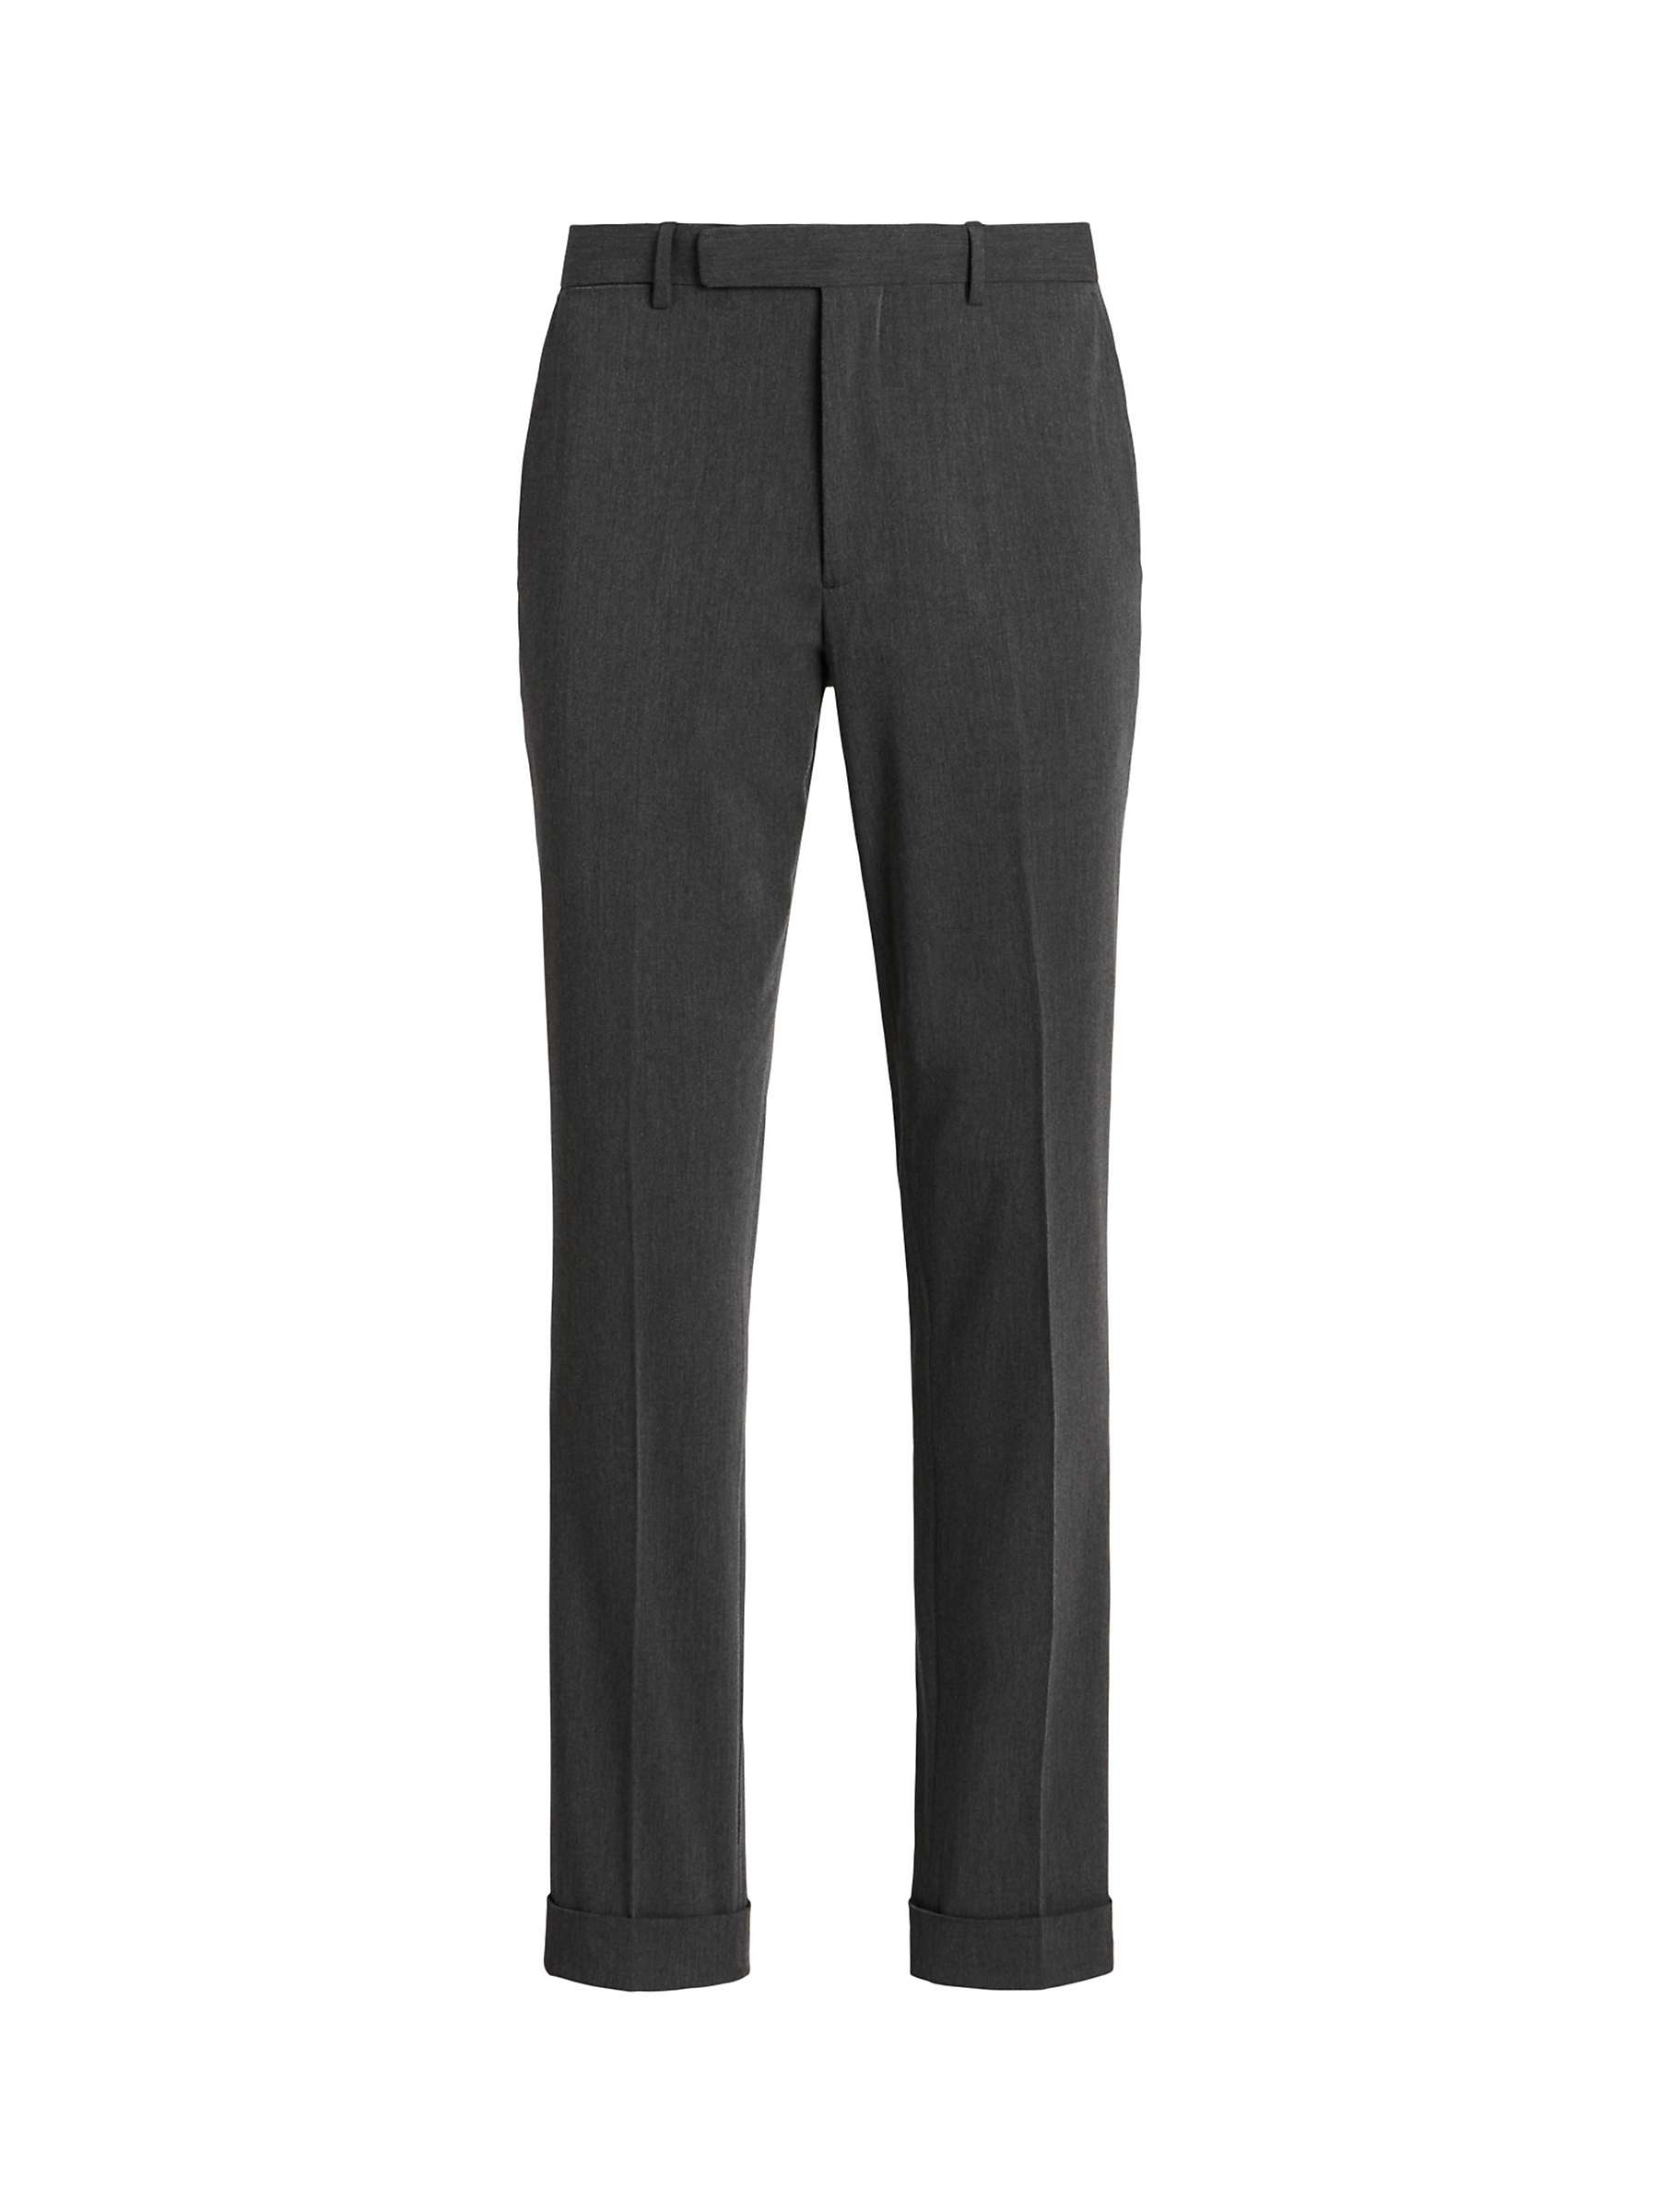 Polo Ralph Lauren Performance Stretch Twill Trousers, Charcoal at John ...